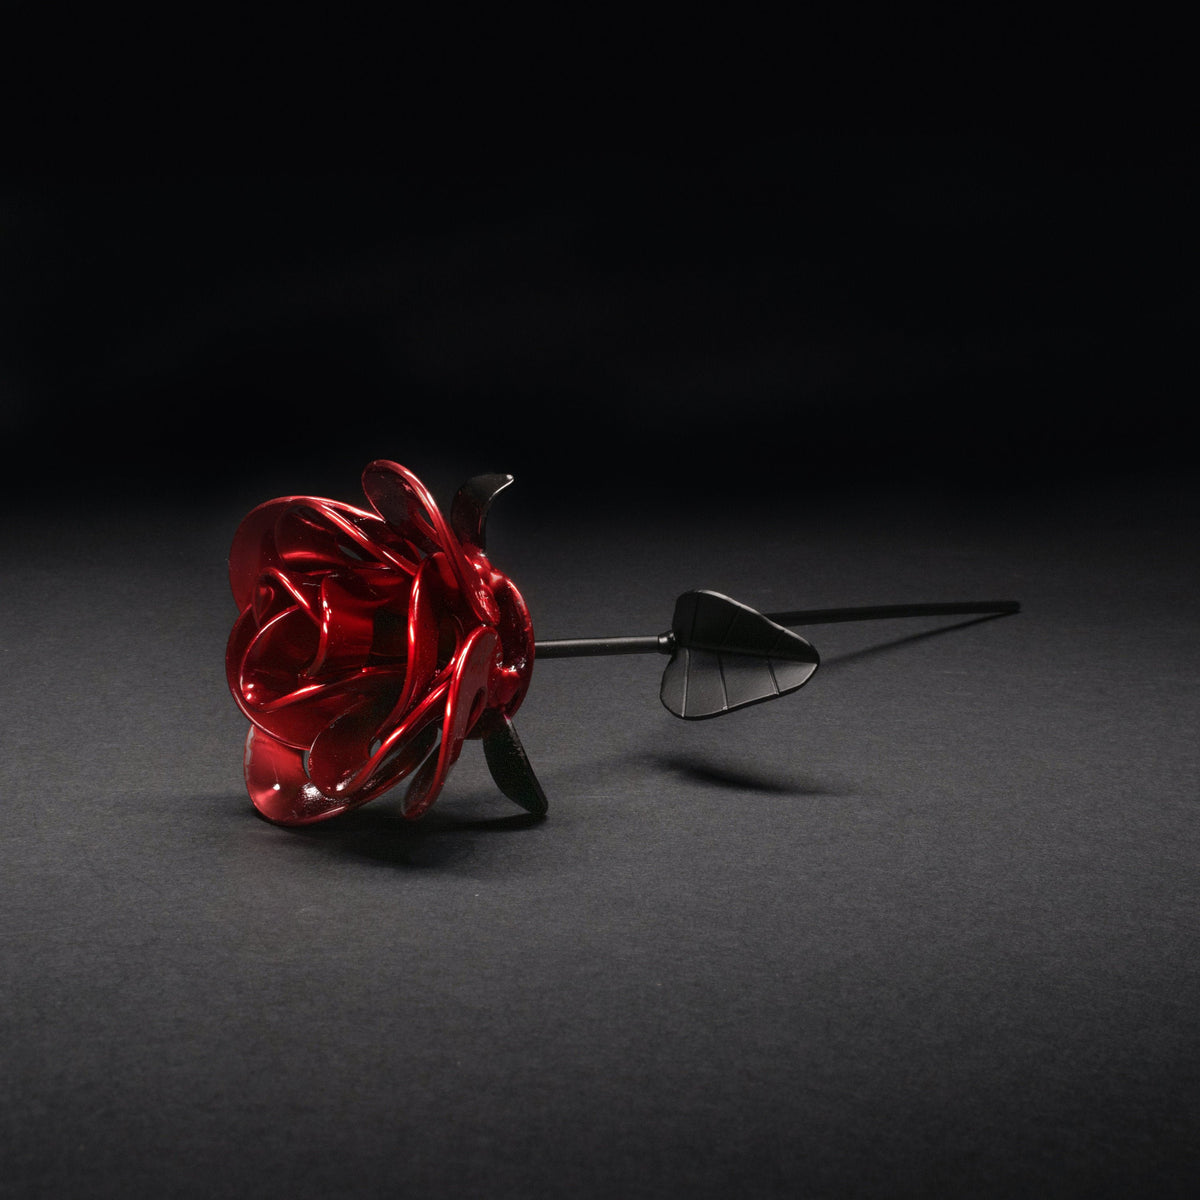 Red and Black Immortal Roses, Recycled Metal Roses, Steel Rose